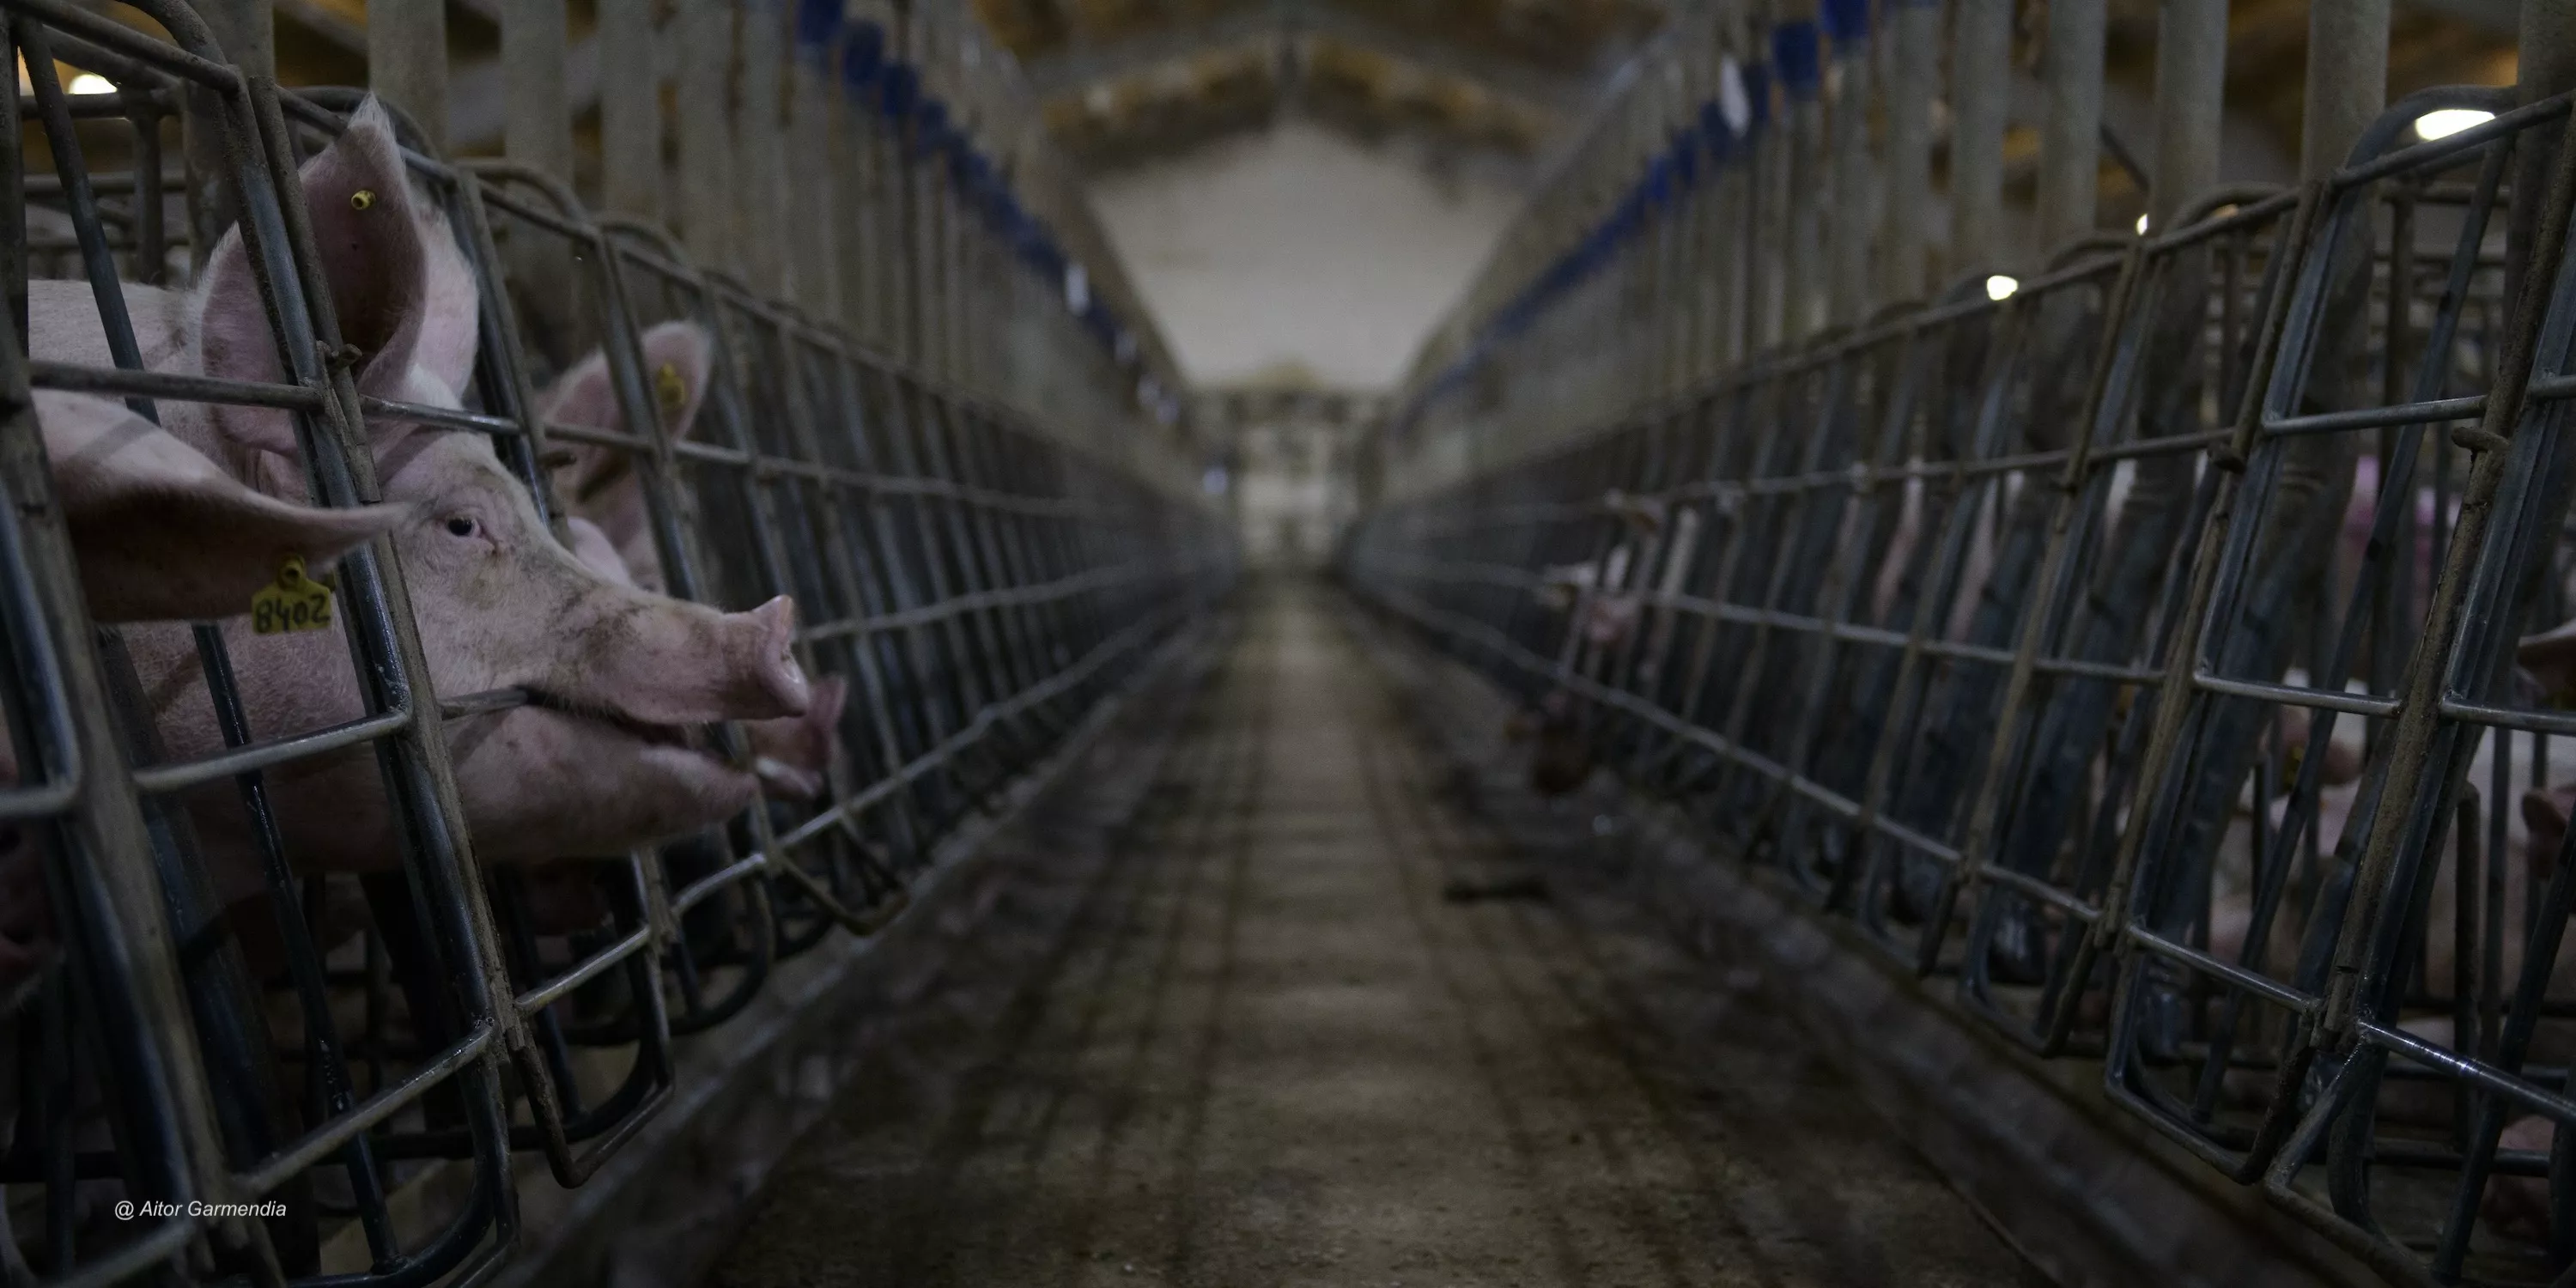 Interior of a factory farm with a pig biting the bars of her cage.